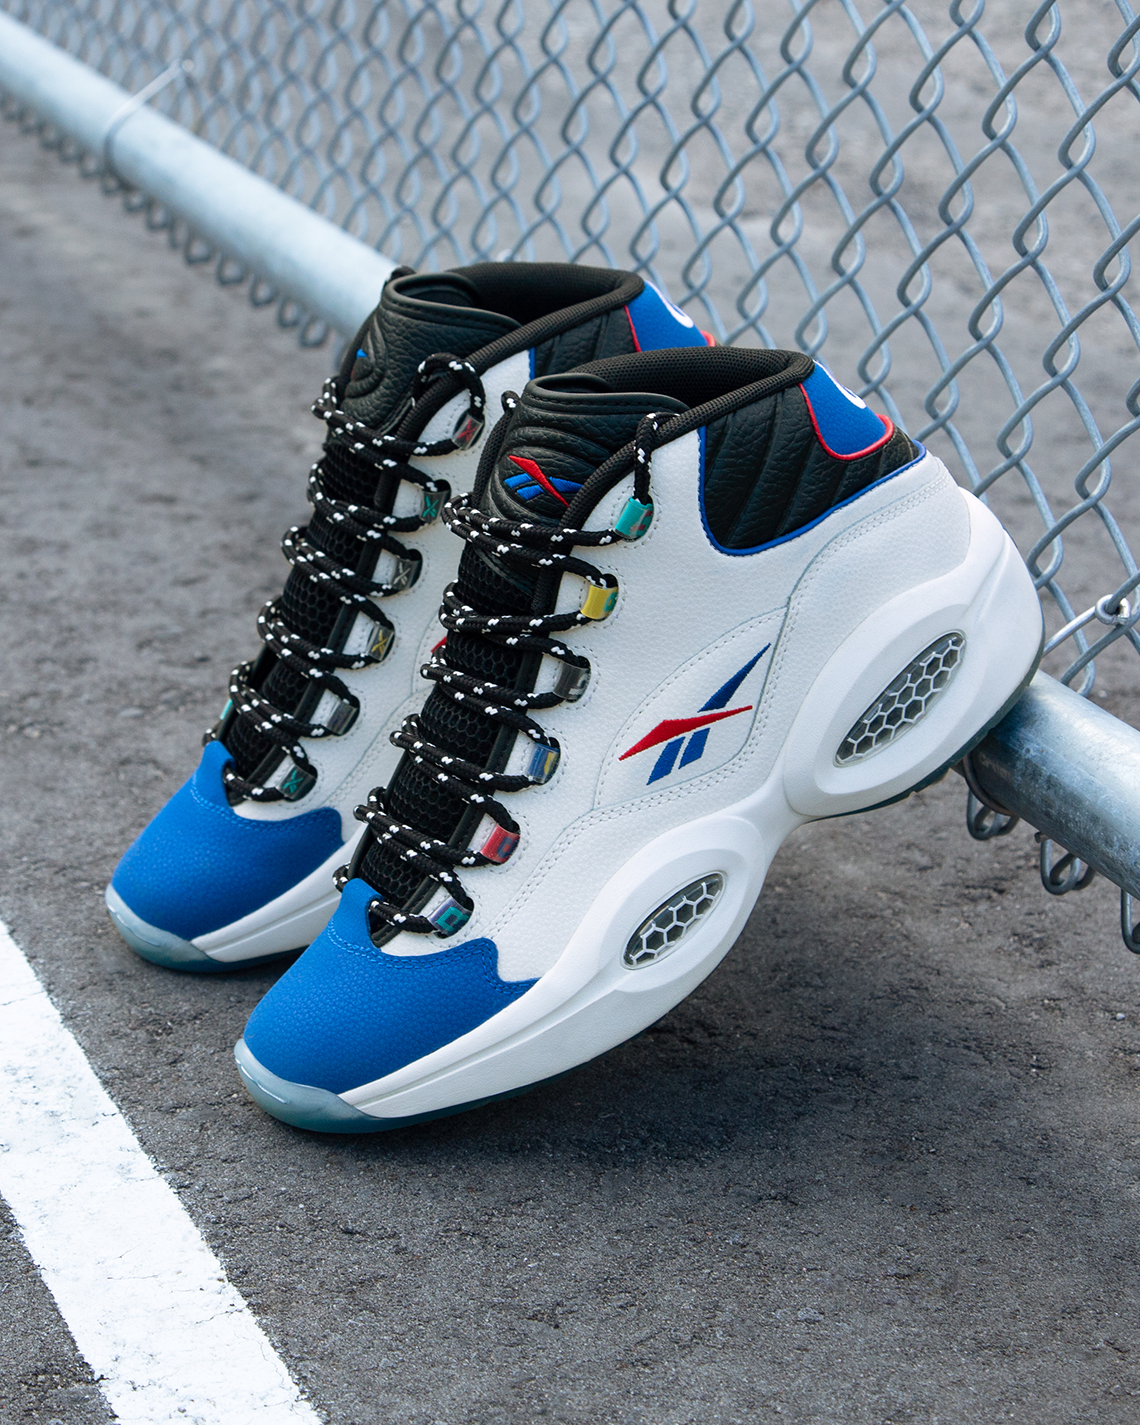 Reebok Question Mid "Answer No One" | SneakerNews.com